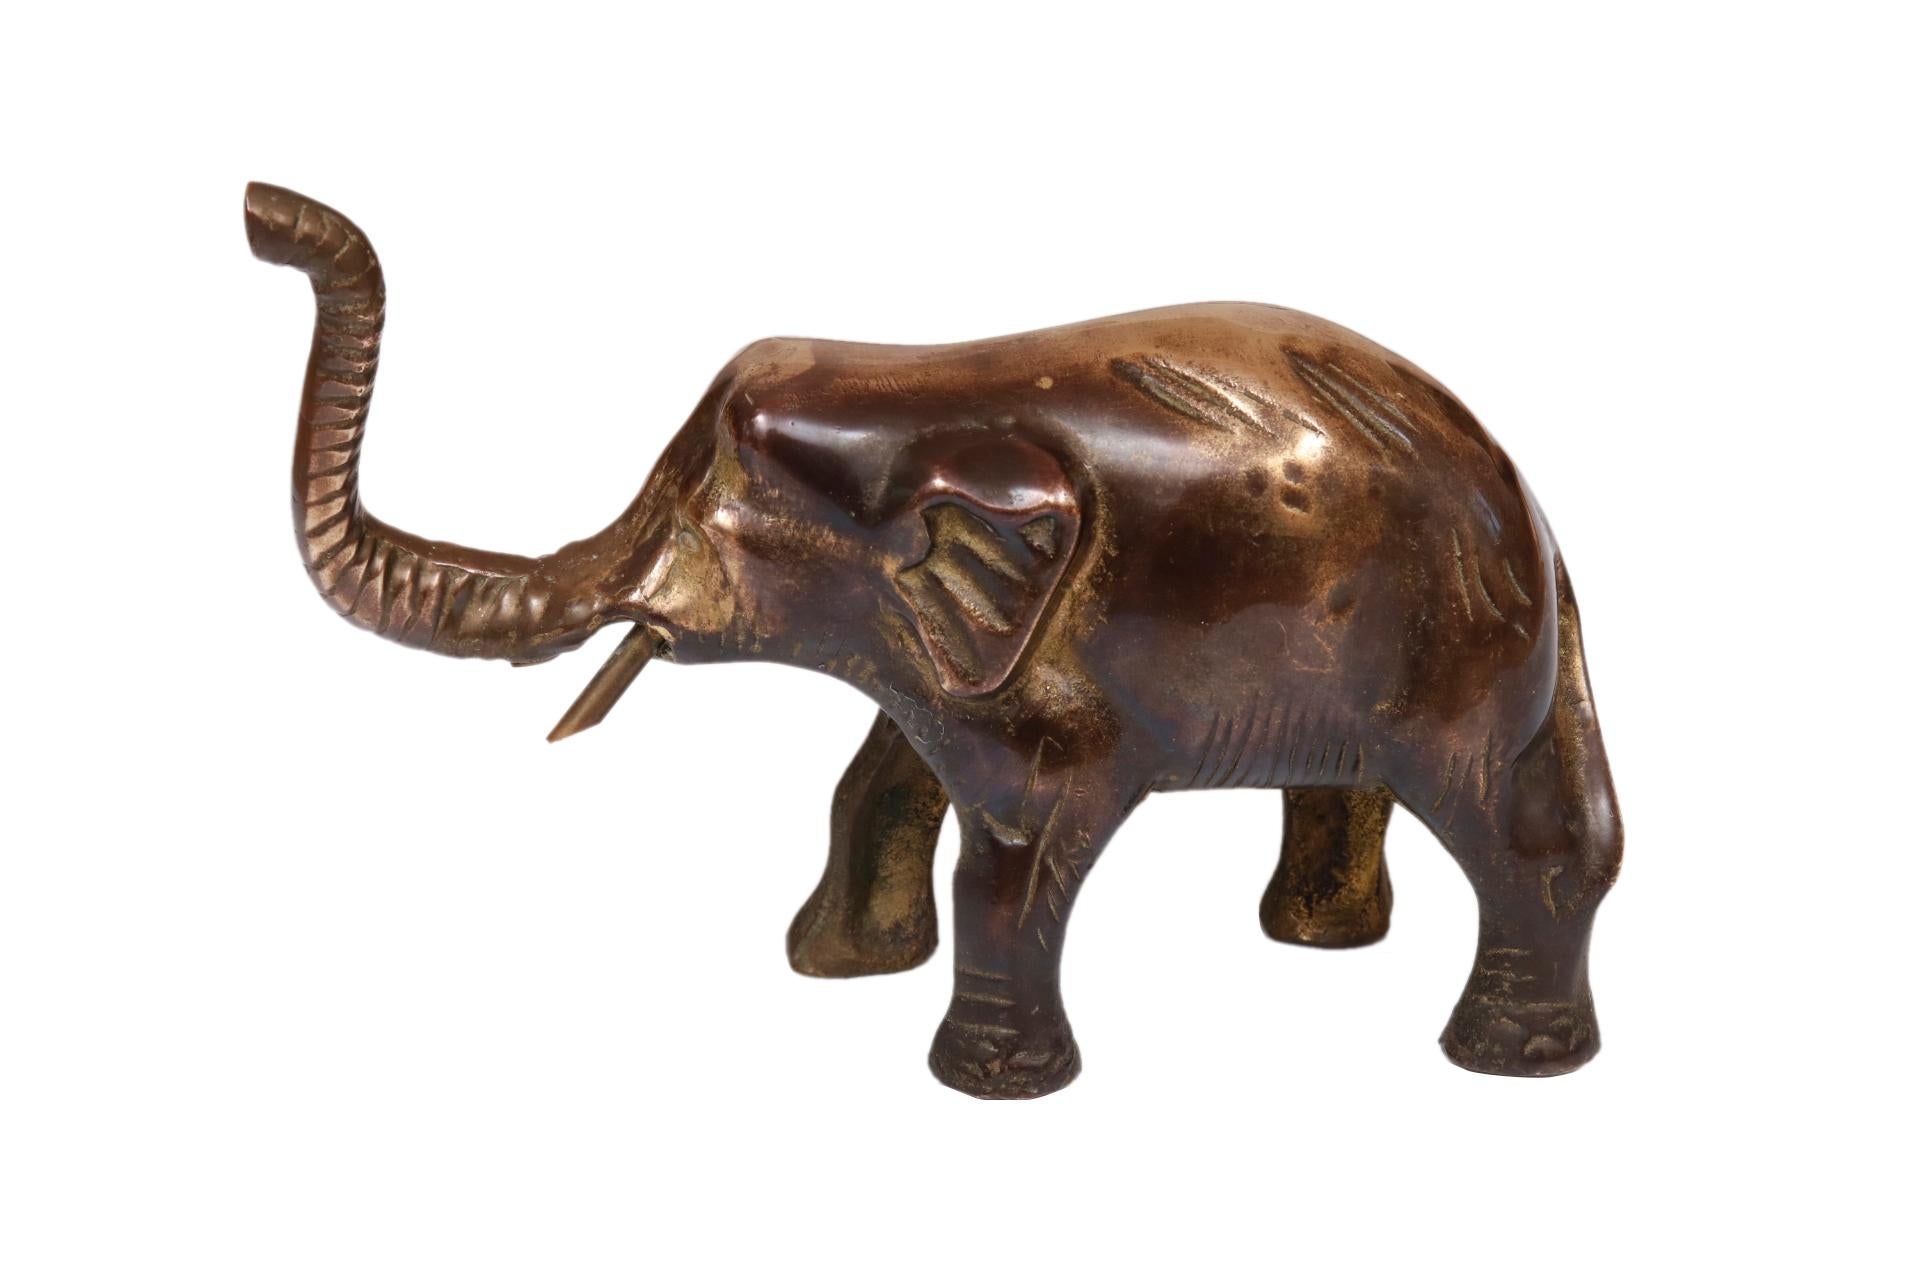 An ornamental bronze figure in the shape of an Indian elephant. Cast with an upraised nose and tusks. Finished with line details to define the eyes, small ears and tail.